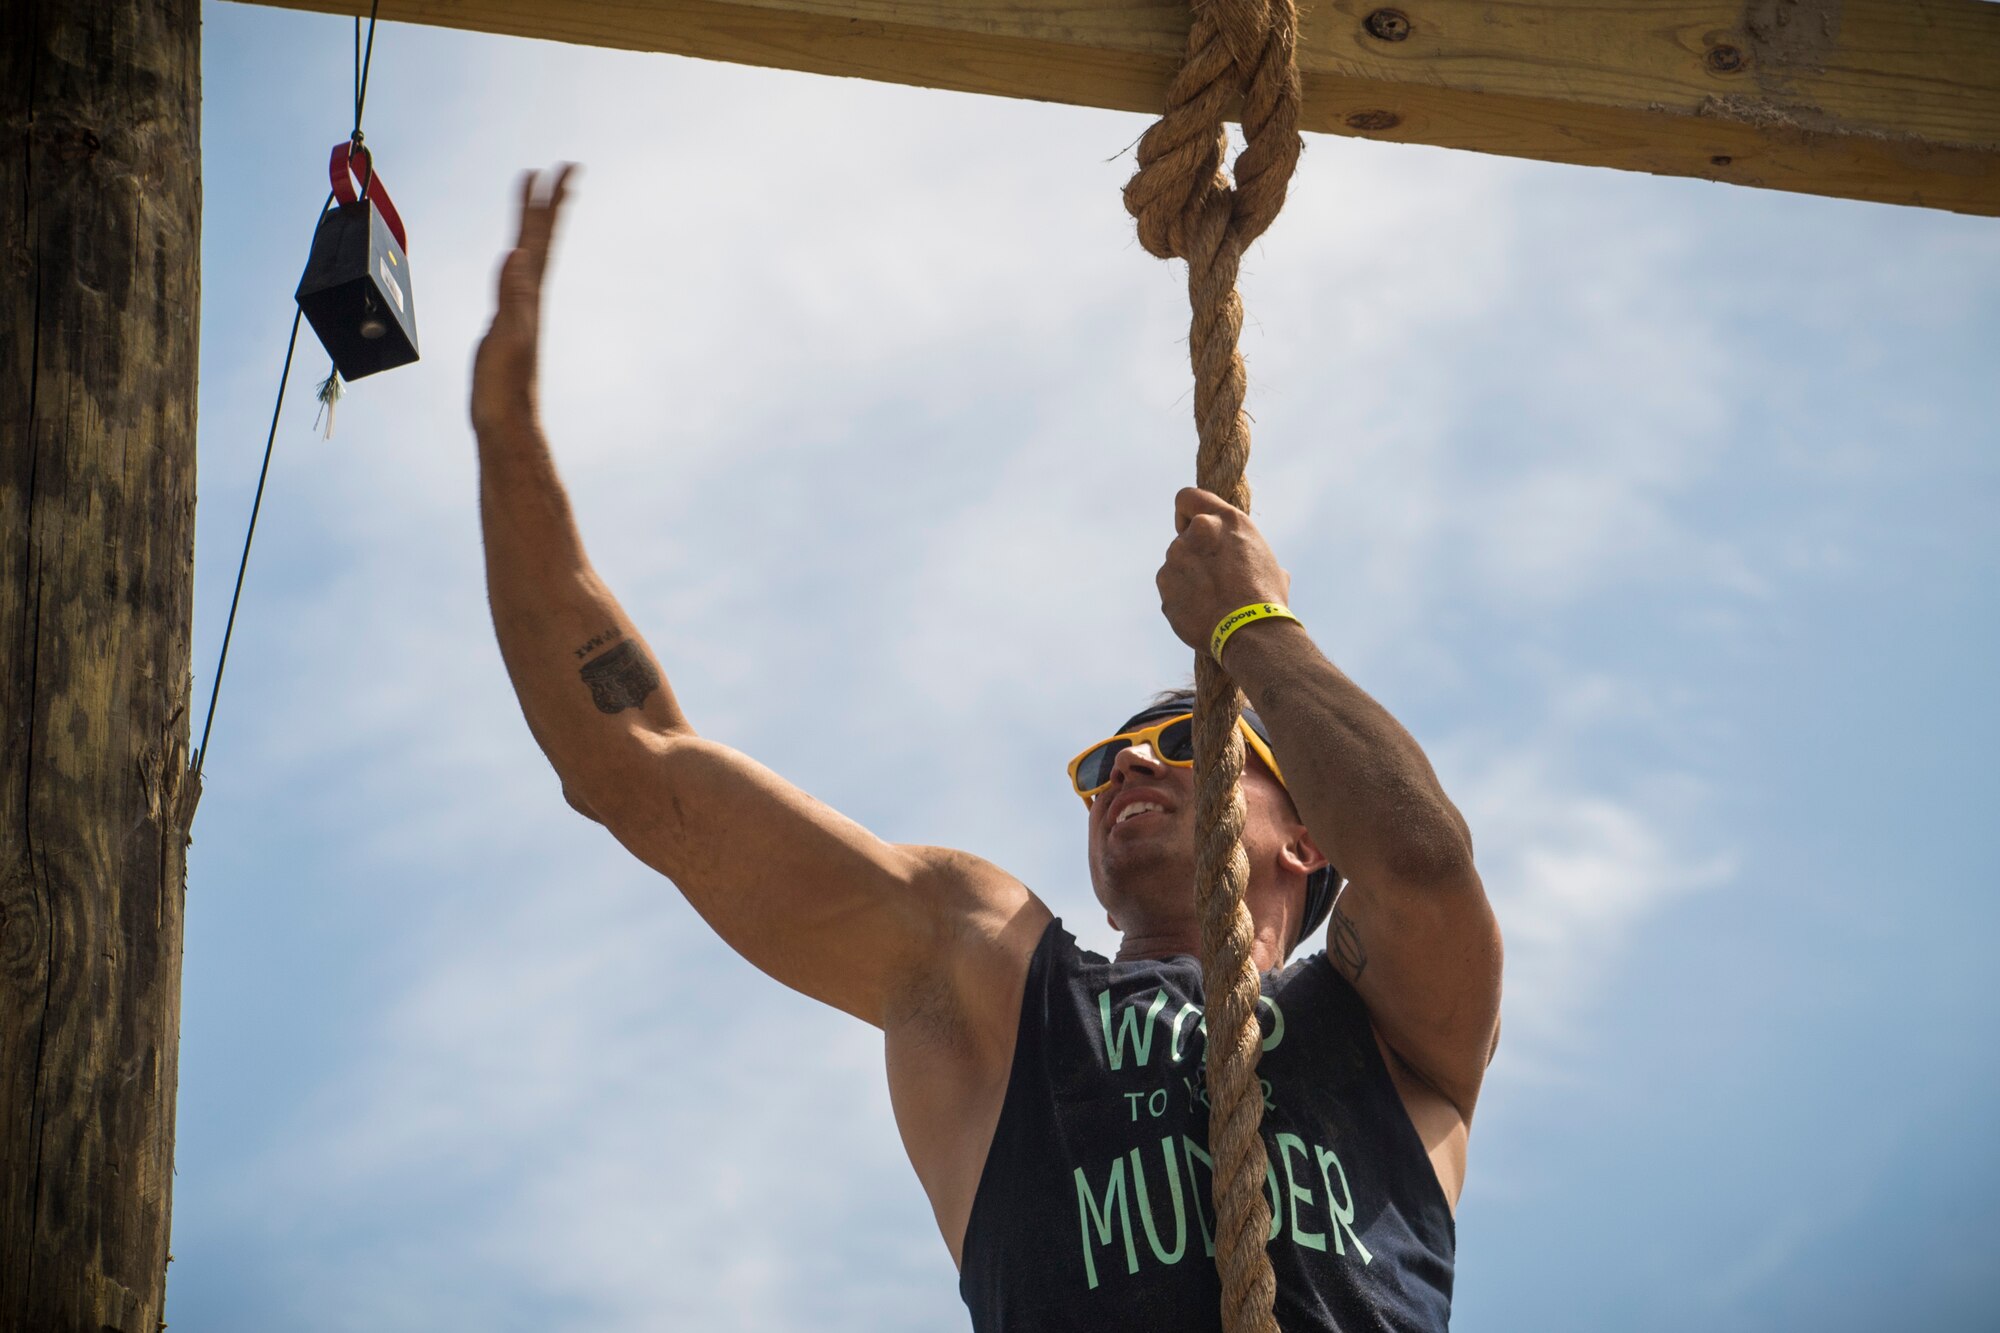 A Moody Mud Run participant completes a rope obstacle, May 5, 2018, in Ray City, Ga. Participants trekked 4.6 miles through the mud, water and 29 obstacles that made up the course. This is the fifth year Moody has hosted the event and more than 800 patrons participated. (U.S. Air Force photo by Senior Airman Janiqua P. Robinson)